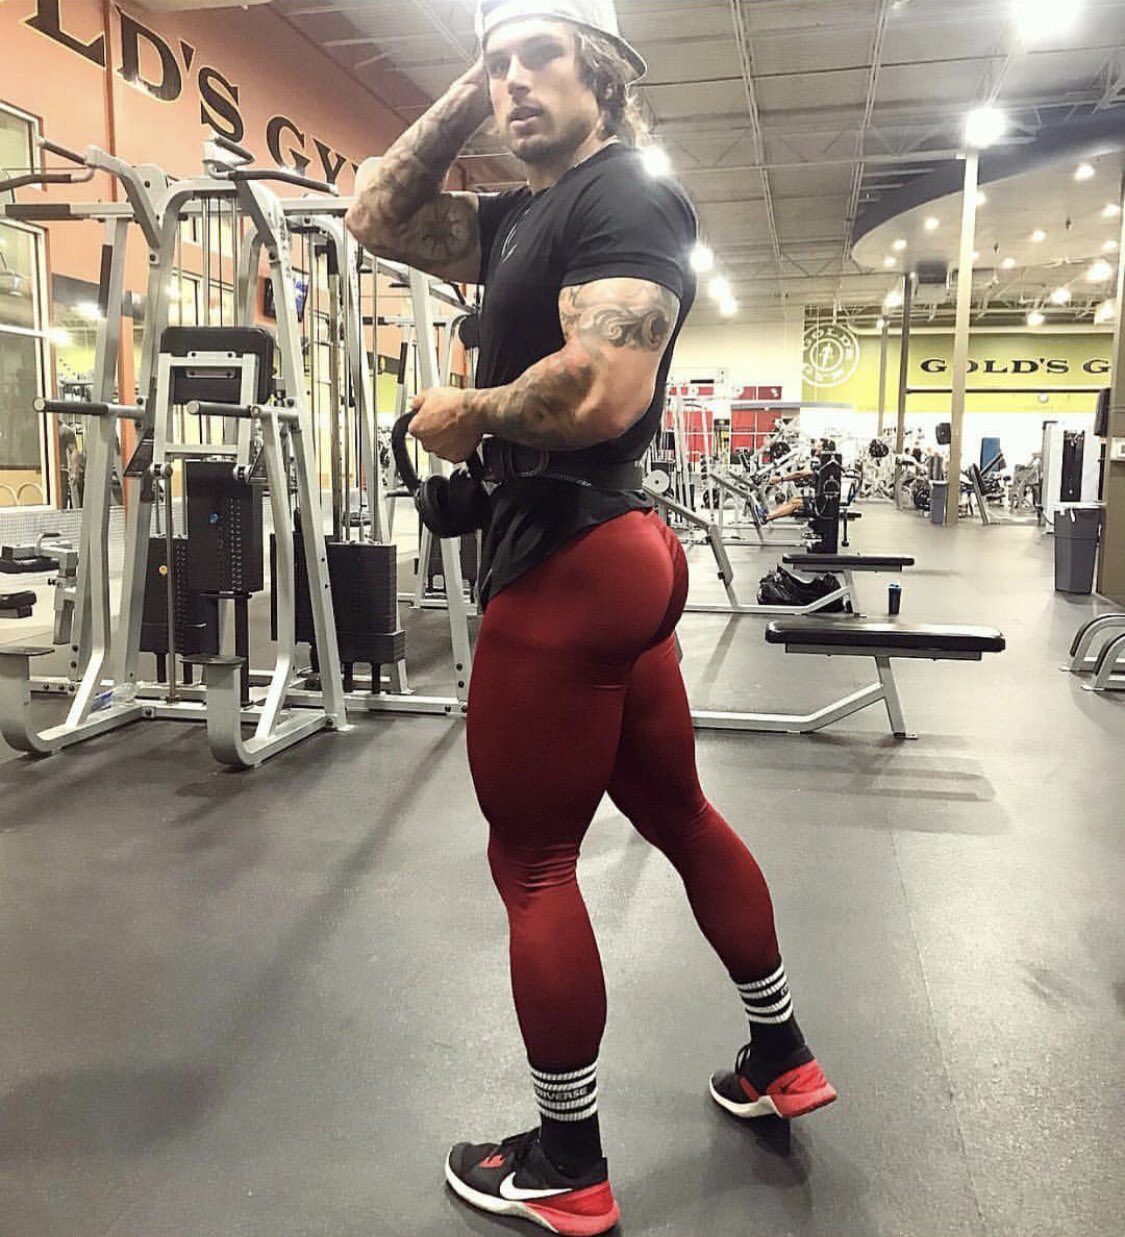 Twitter 上的 AestheticMen："Red alert #bulge #muscle #musclegod #bodybuilding #gym #gymaesthetics #workout #legs #quads #biceps #pumped #shredded #compressiontights #tights #leggings #master #thighs #power #cashmaster #balls #leather #latex #shiny ...